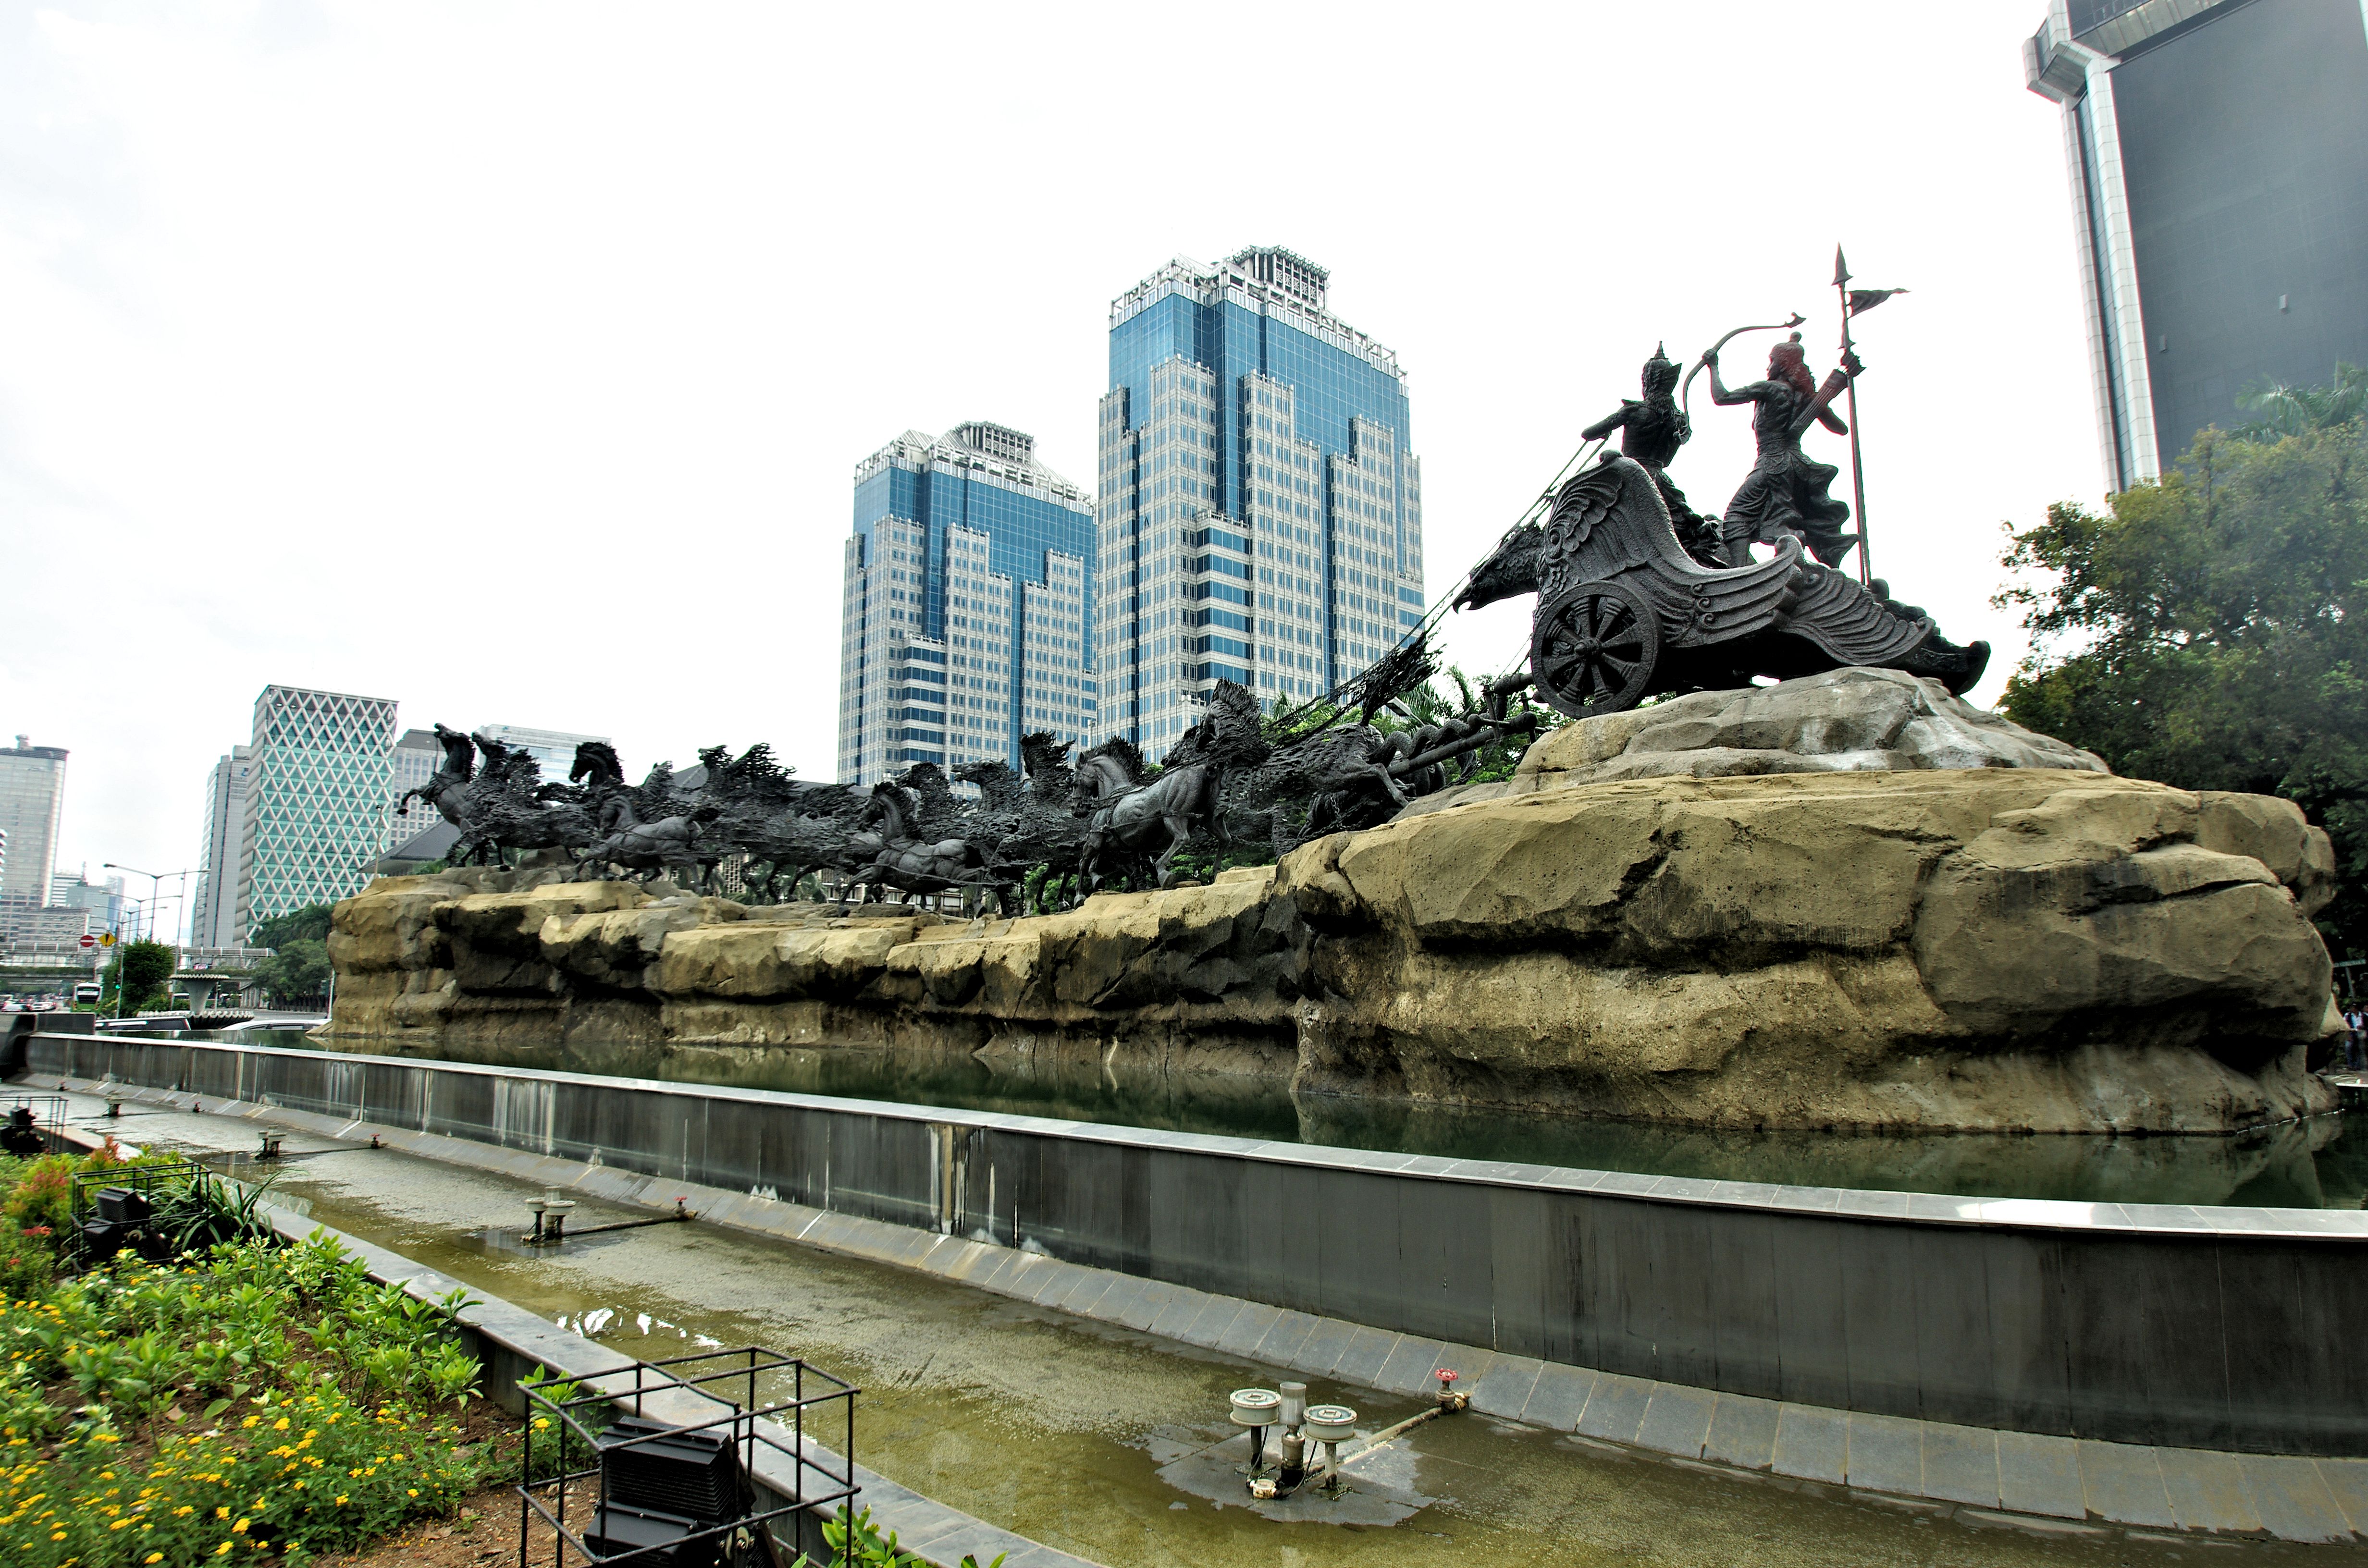 "The Arjuna-Krisna statue" by a roundabout in Jalan Merdeka West, Central Jakarta (2015-03-01). A work of the contemporary master artist, Ir. I Nuarta Nyoman.